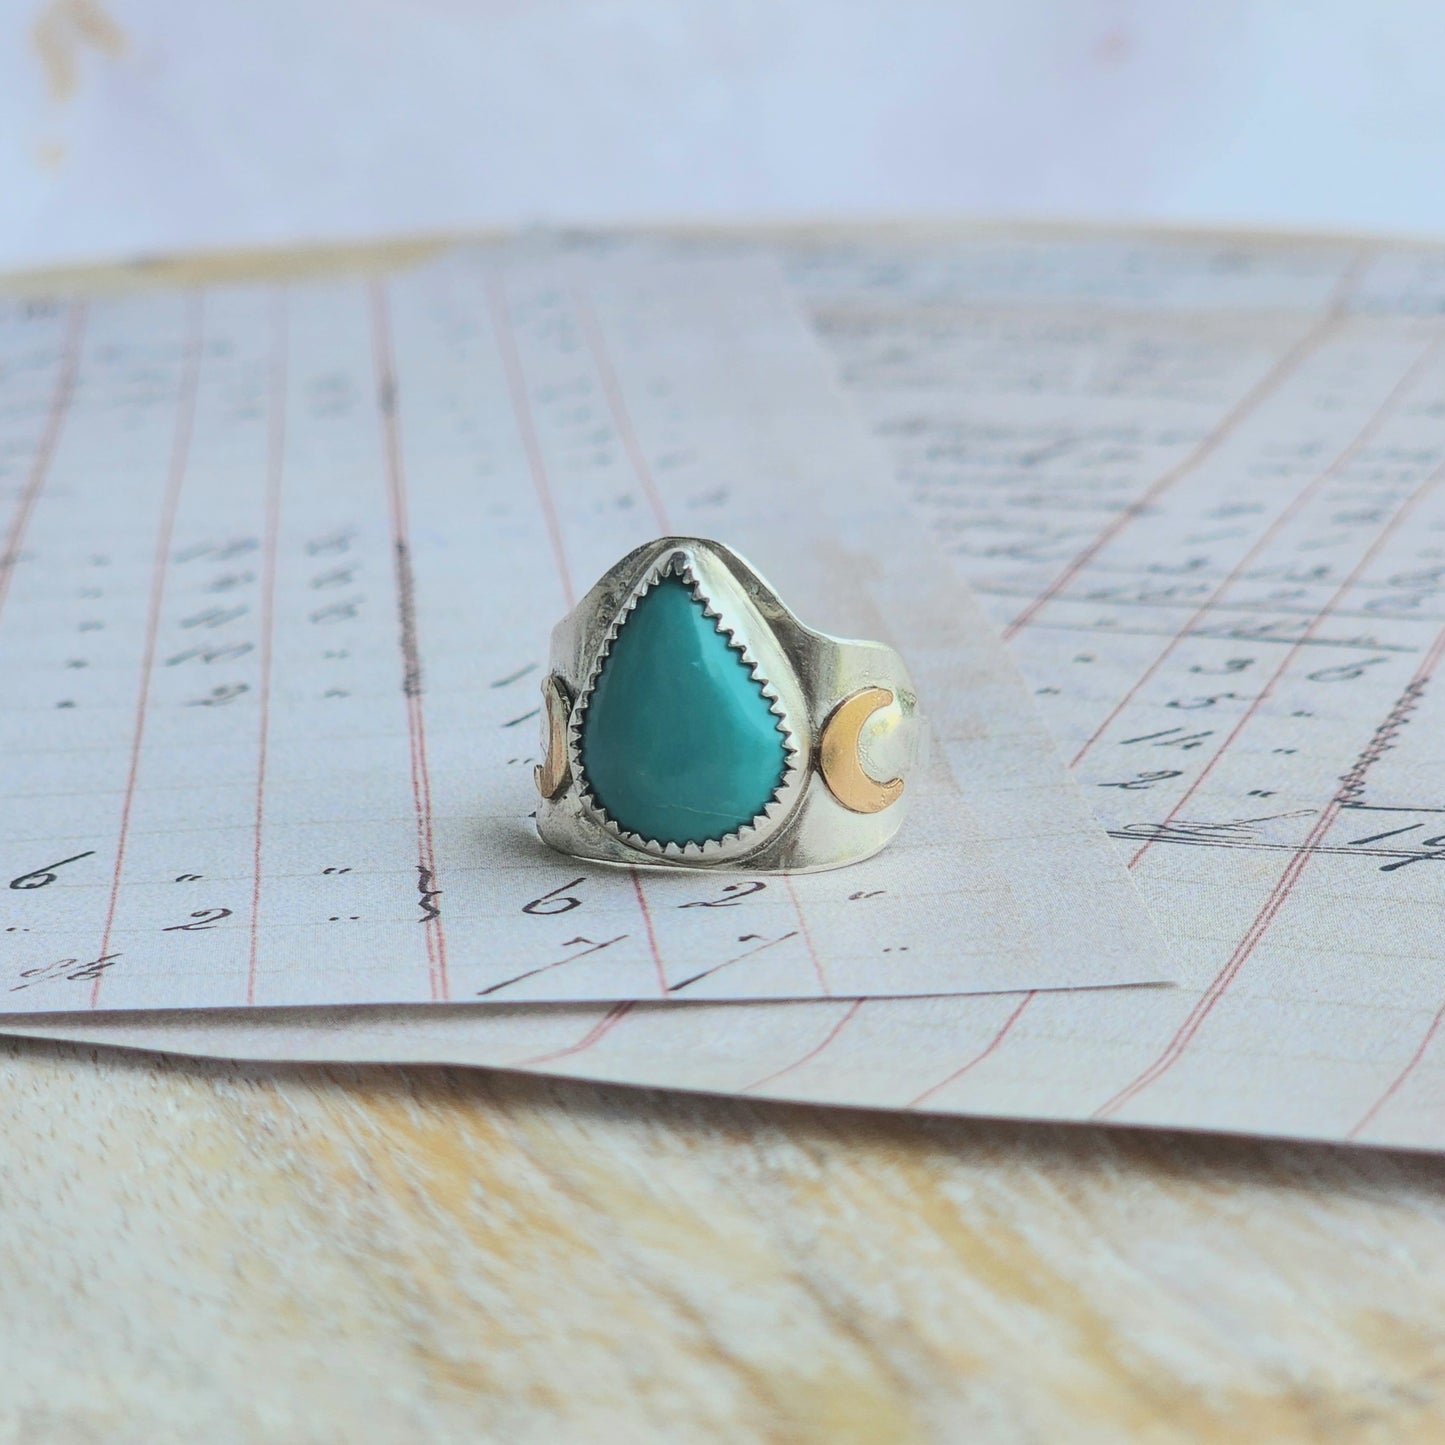 Sleeping Beauty Turquoise Cuff Ring Size 6.5